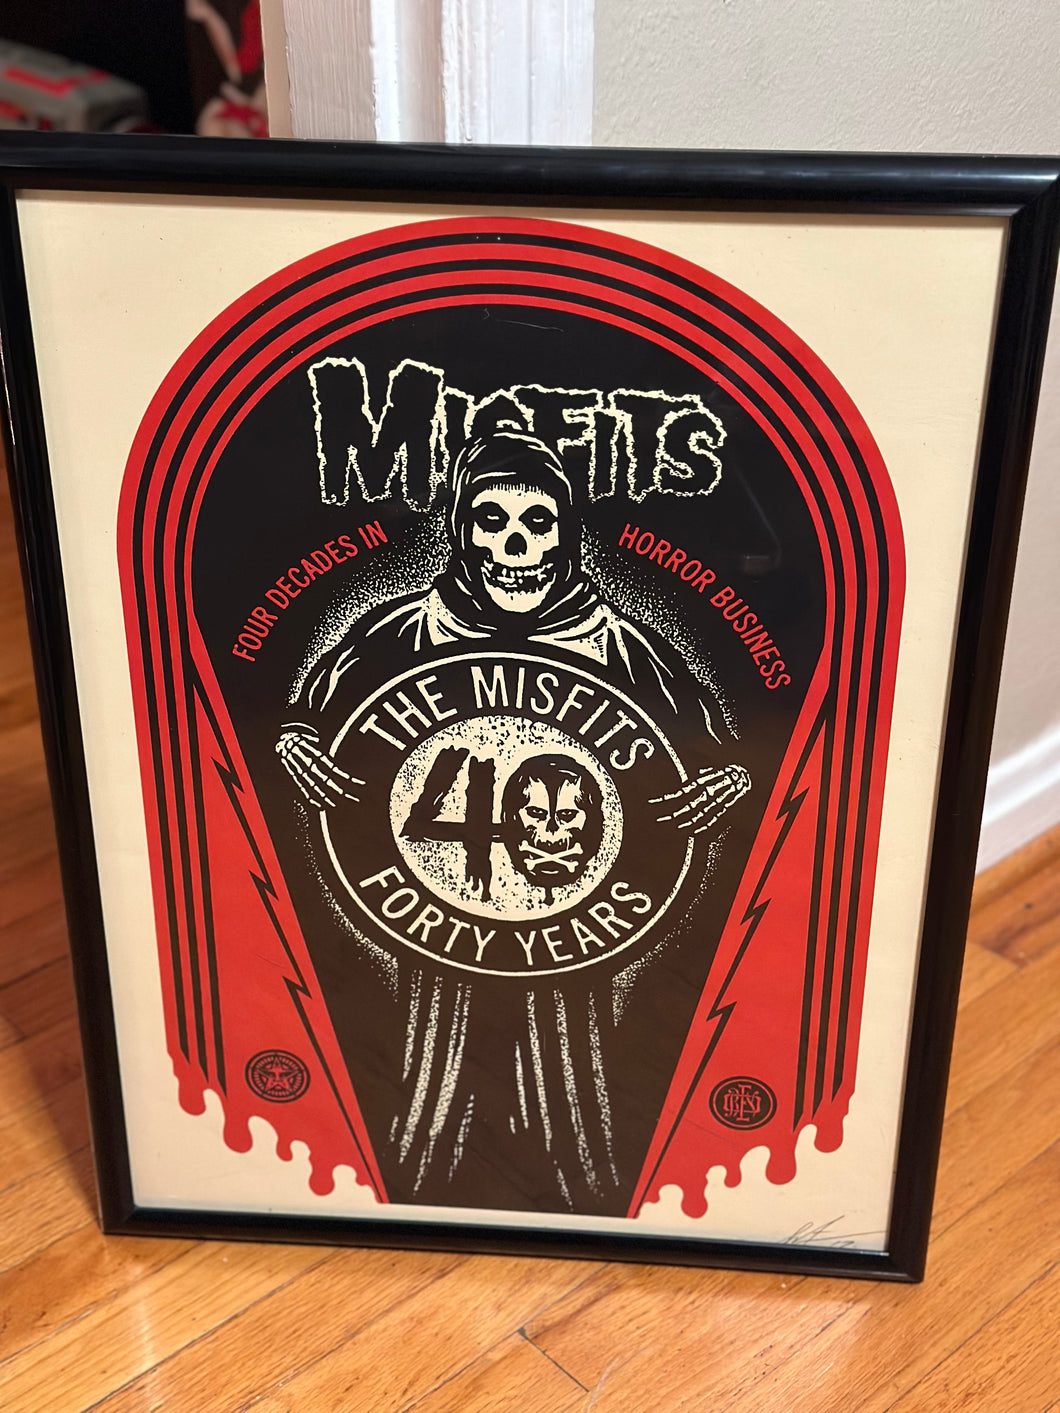 Obey Misfits 40th Anniversary Shepard Fairey Signed and Numbered Screenprint Danzig